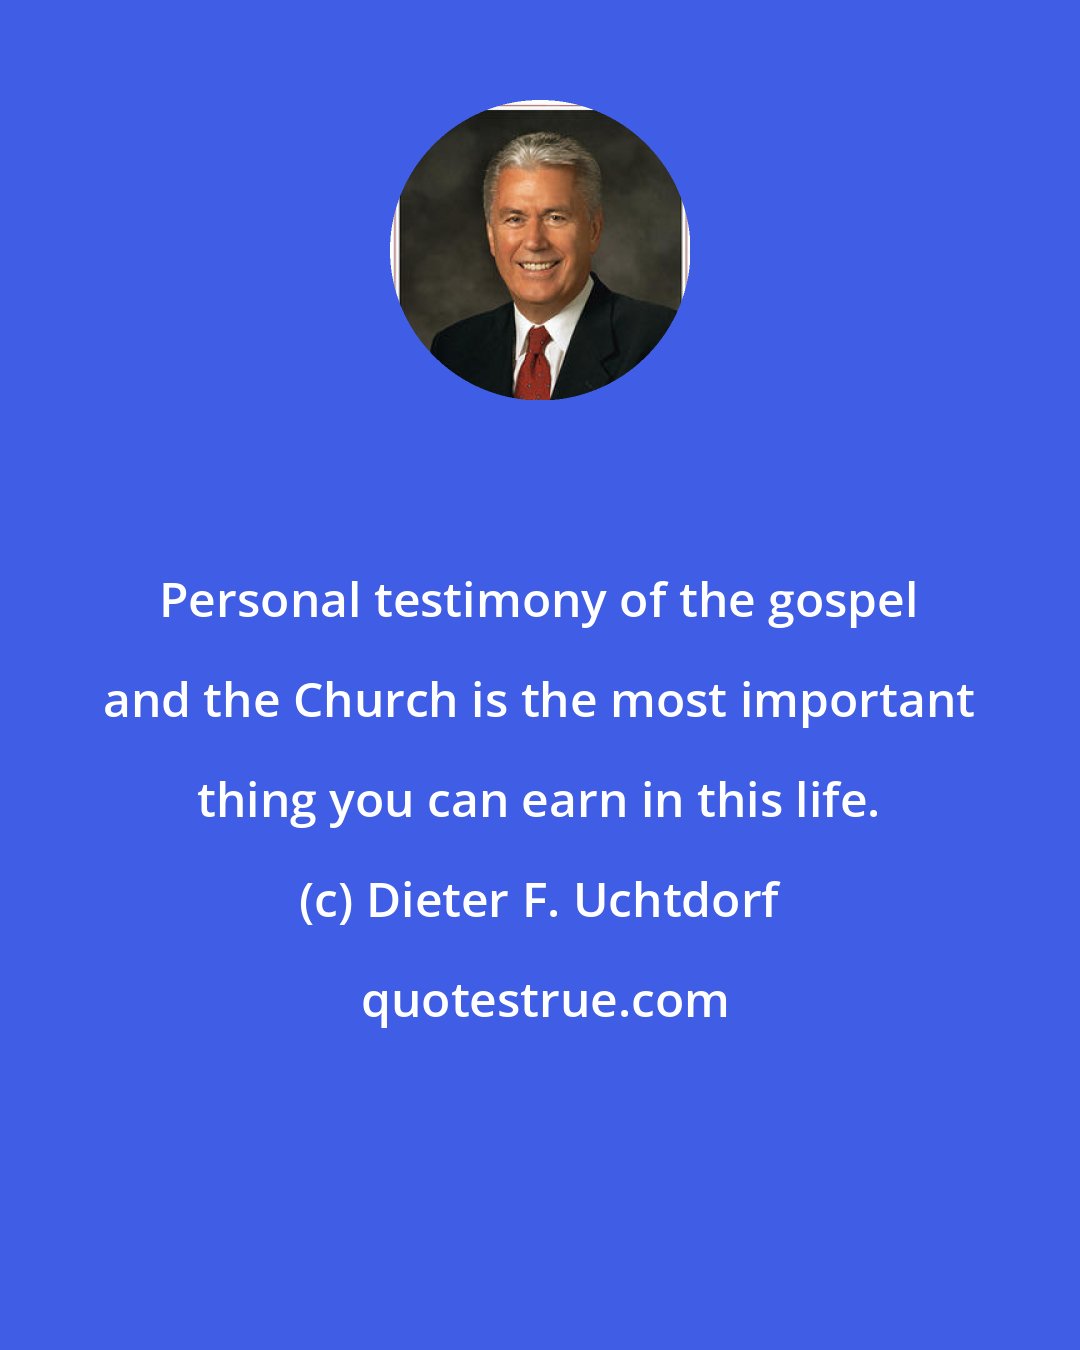 Dieter F. Uchtdorf: Personal testimony of the gospel and the Church is the most important thing you can earn in this life.